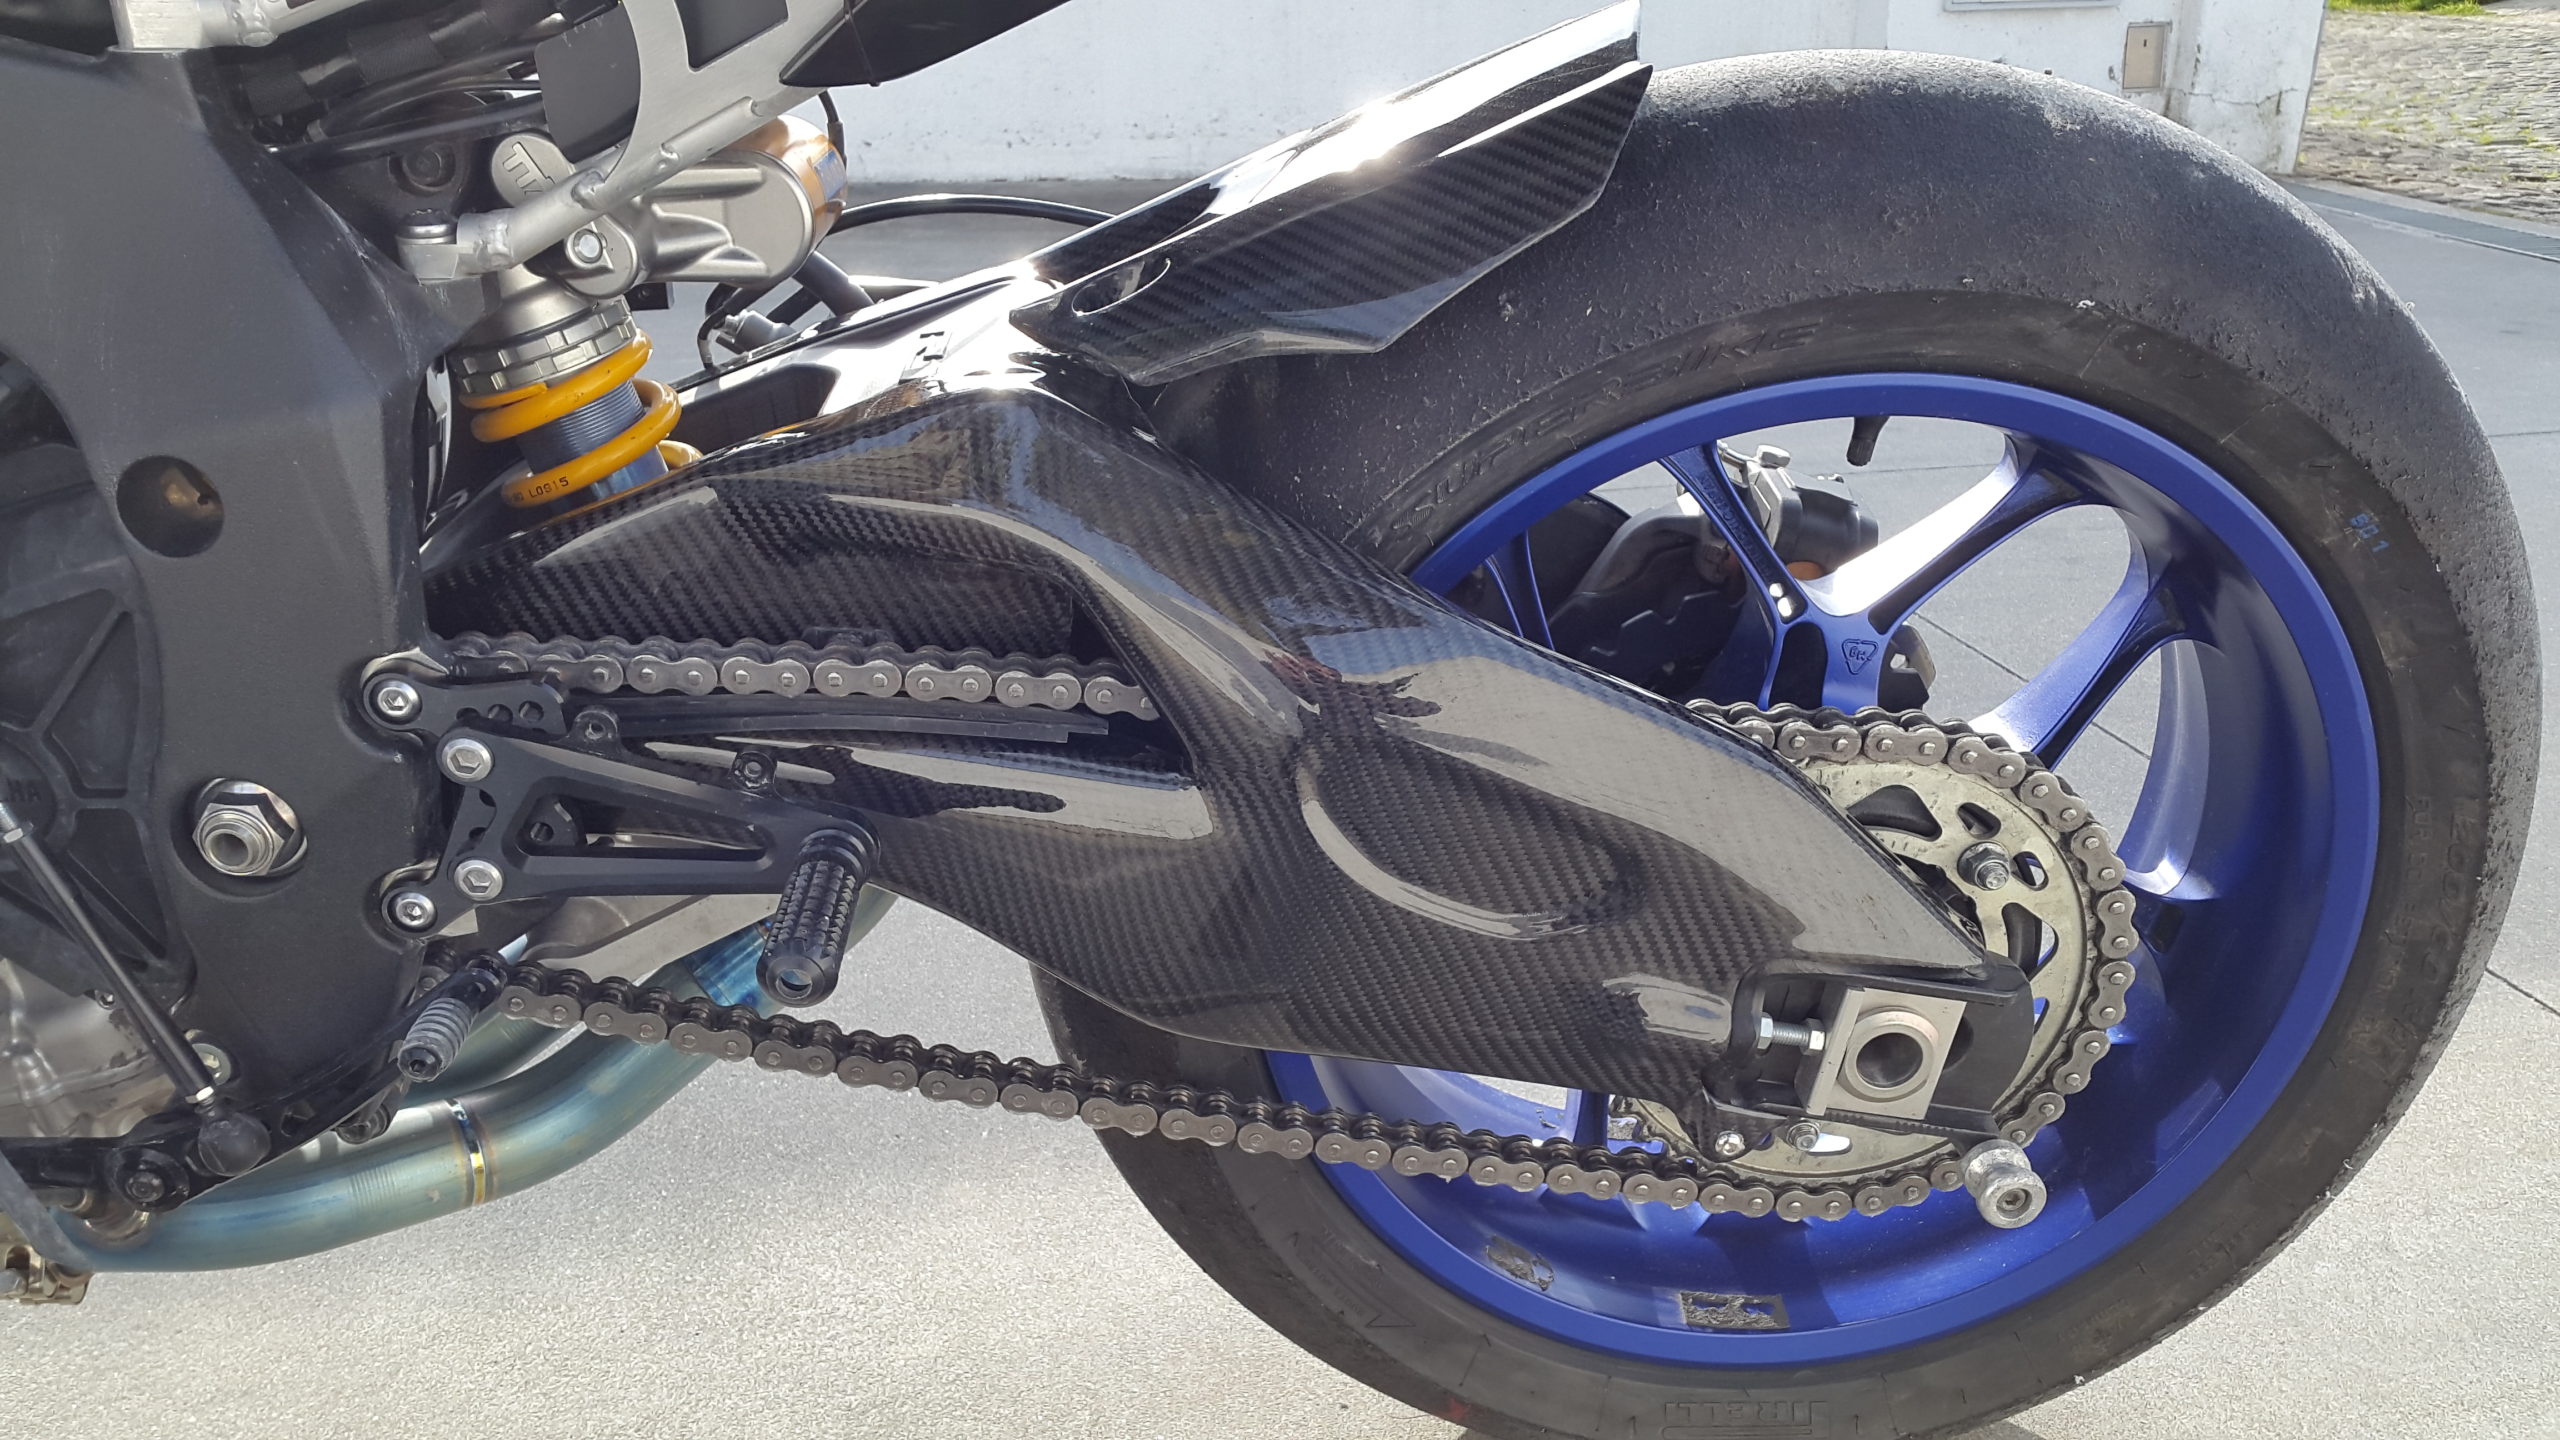 ONE/RR/Gold TRS Carbon Look ABS Plastic Swingarm Cover 